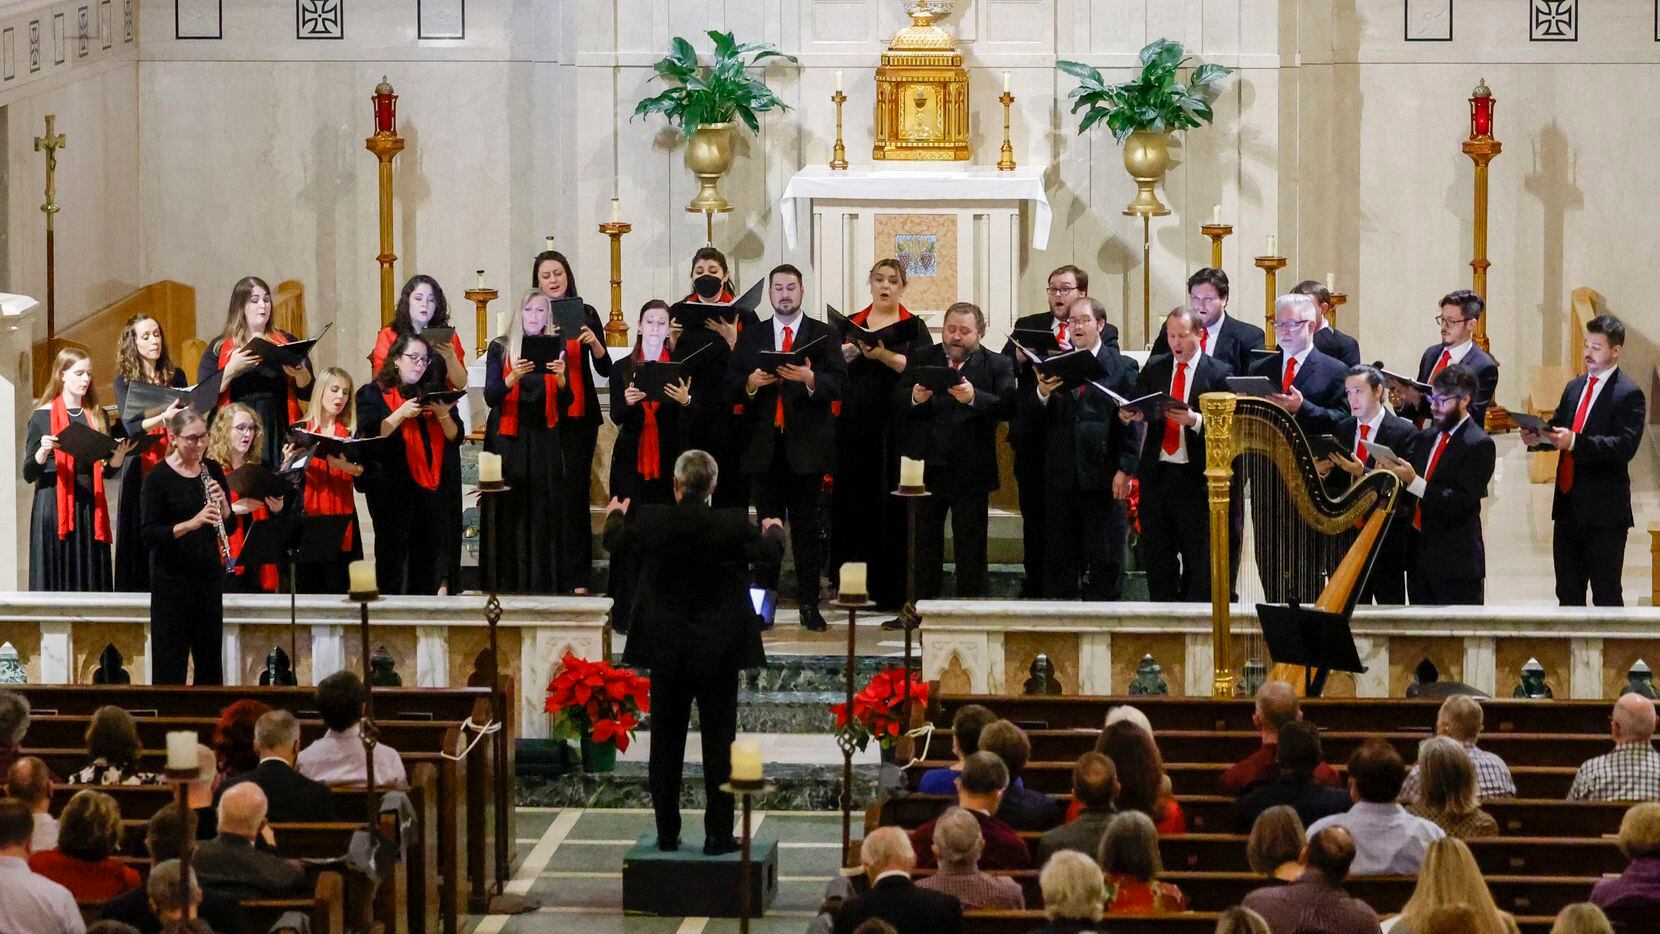 The Orpheus Chamber Singers, led by Donald Krehbiel, with oboist Willa Henigman, perform...